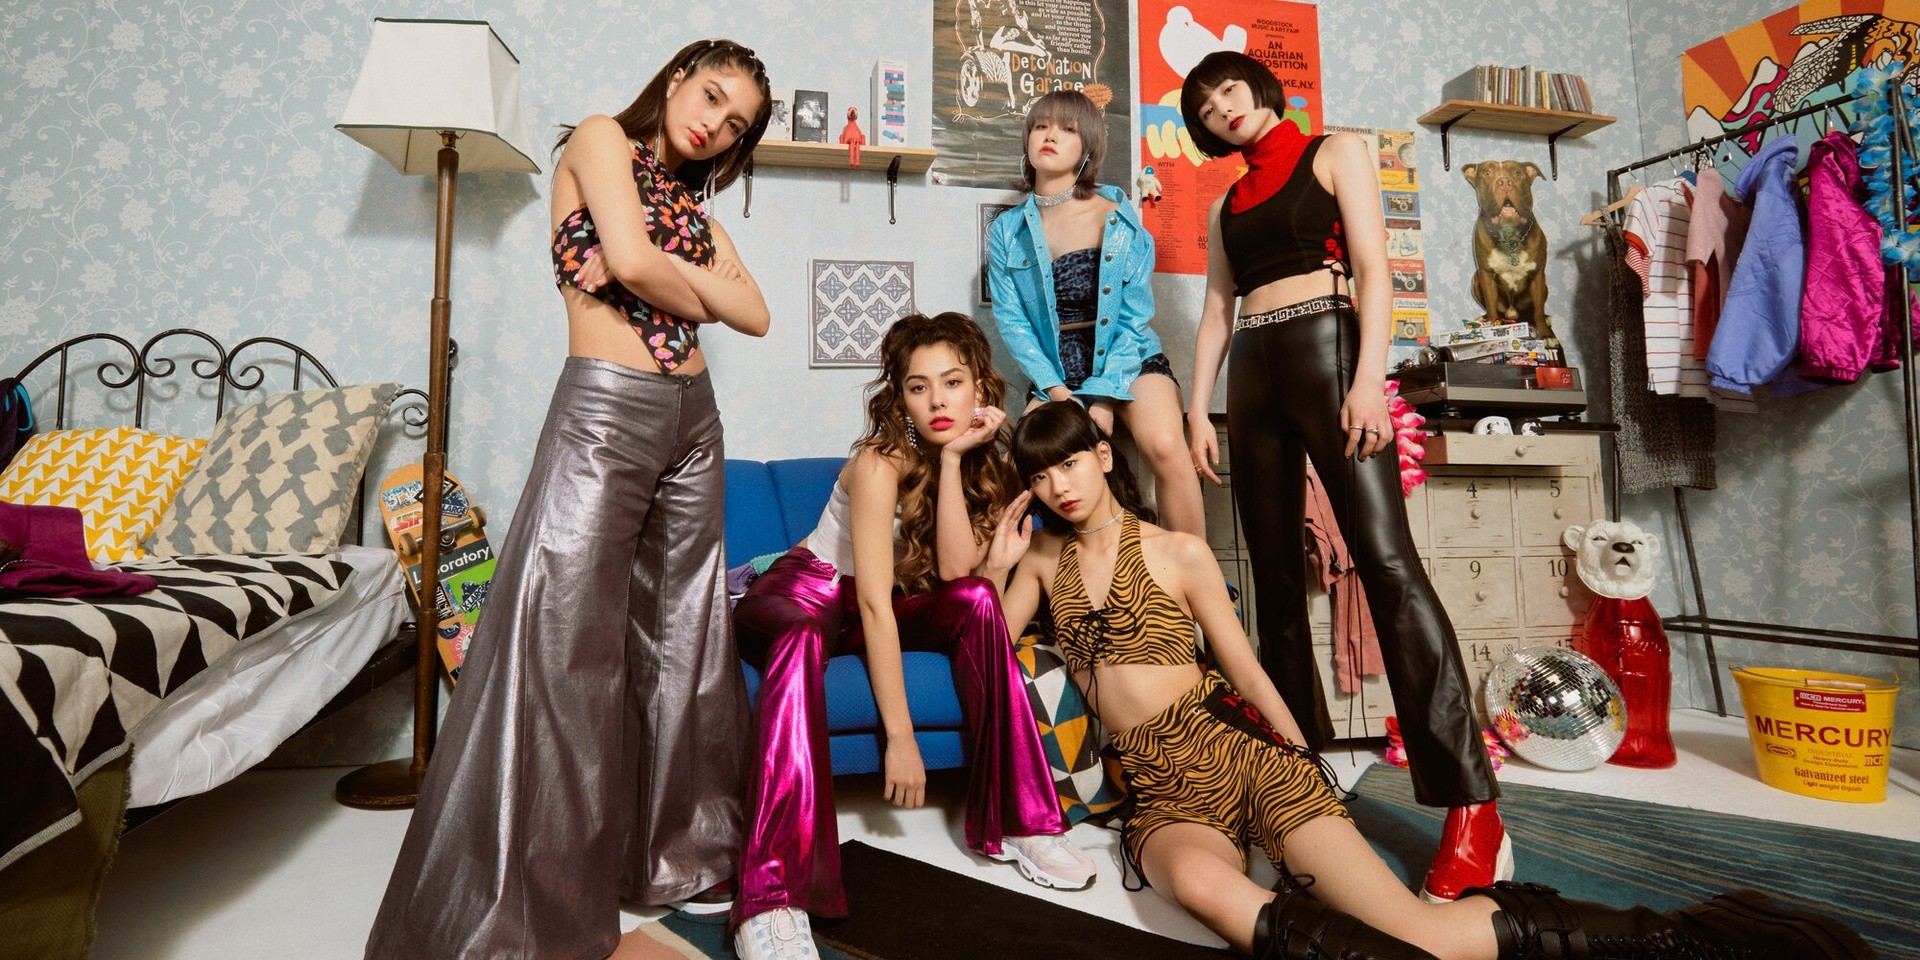 Asia Spotlight: J-pop group FAKY get real with their genre-bending music